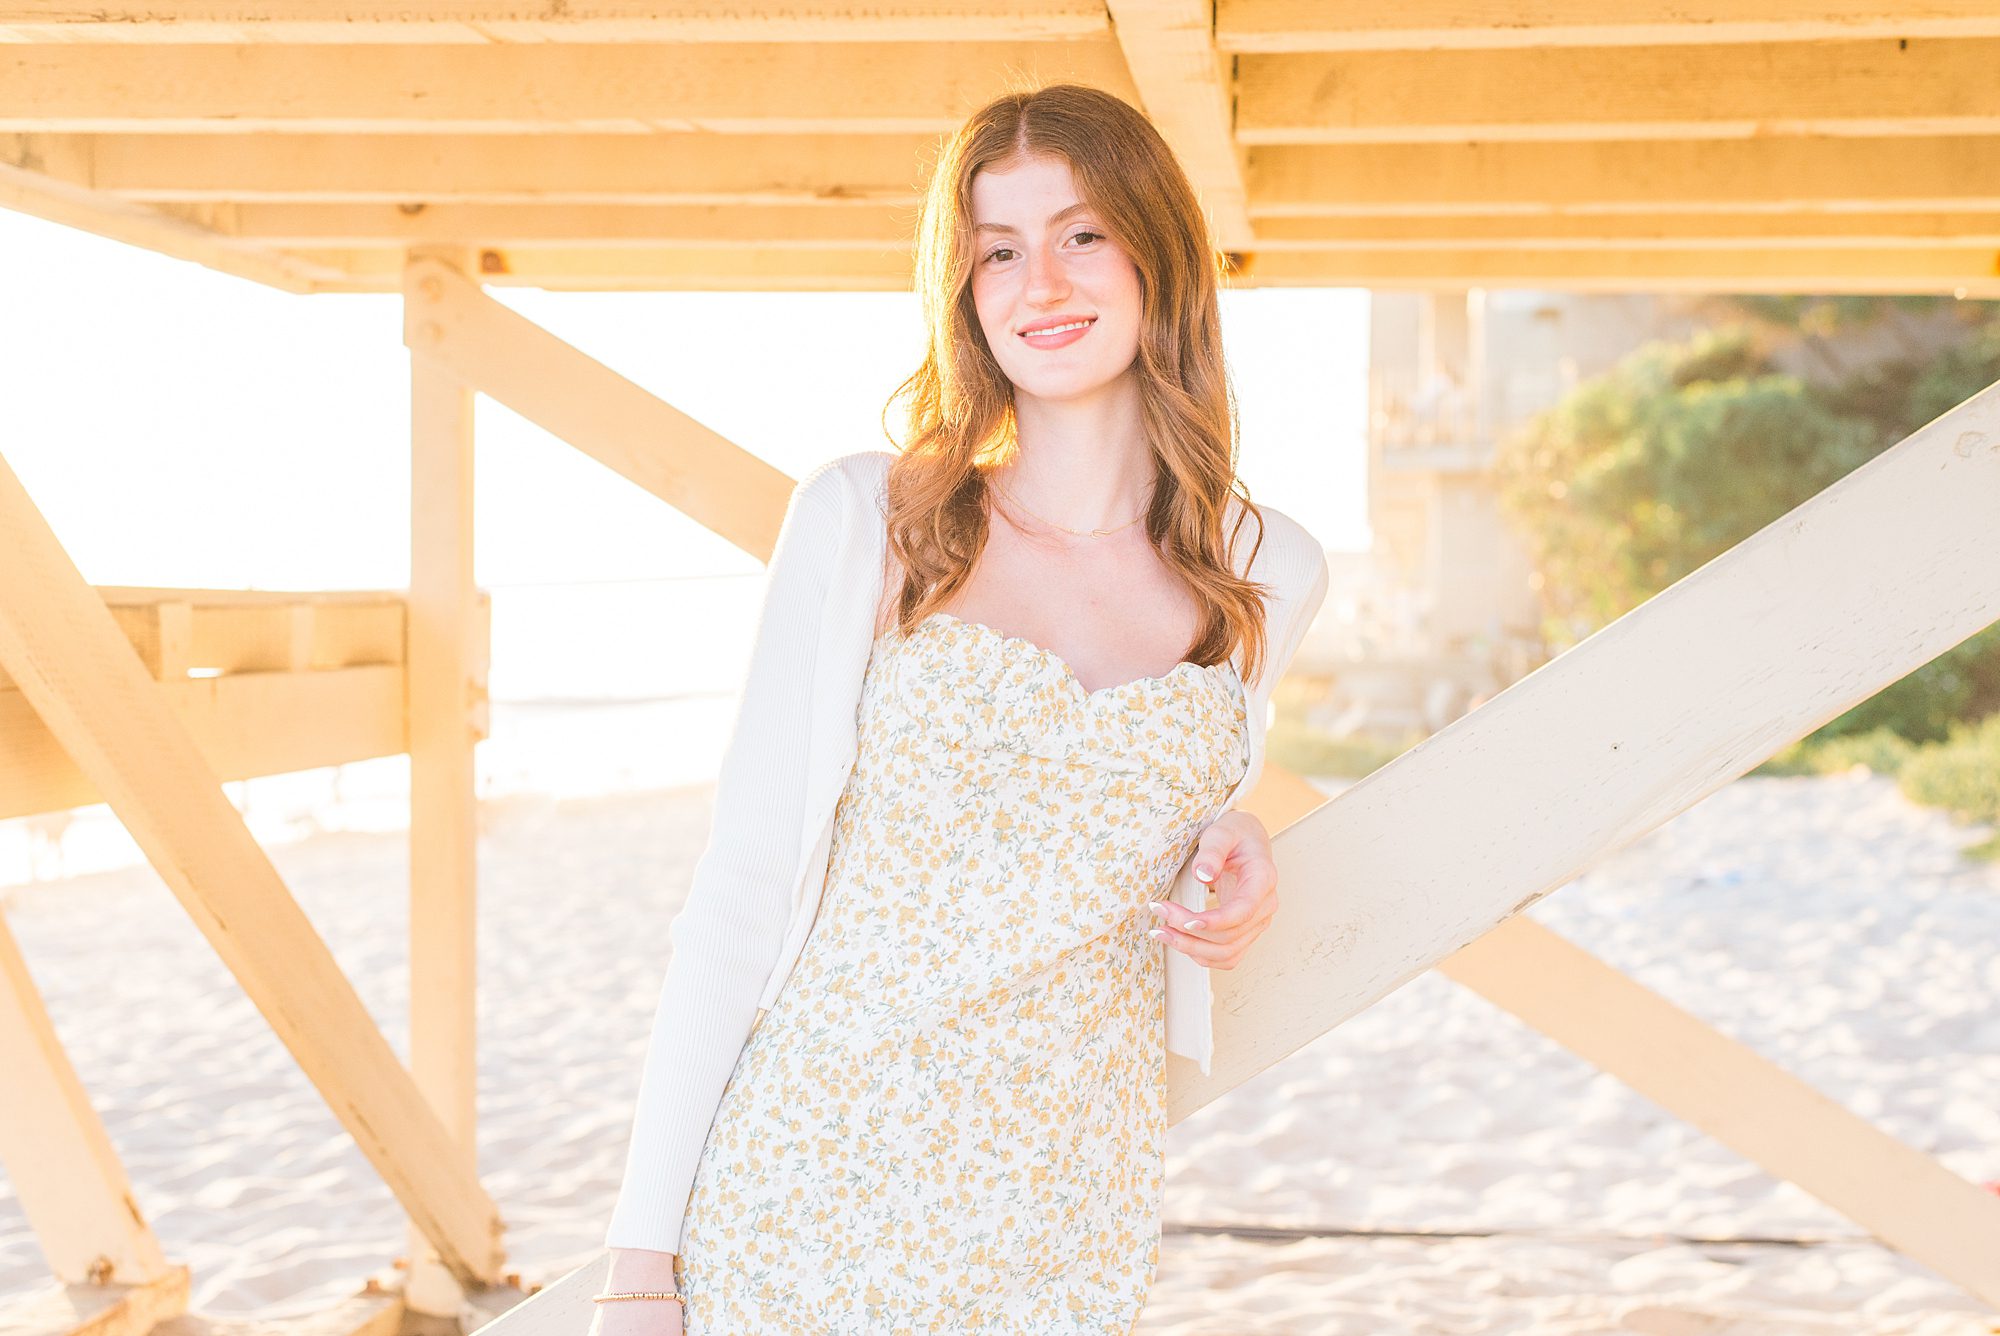 Light and Airy Senior Session on the beach in Carlsbad, CA